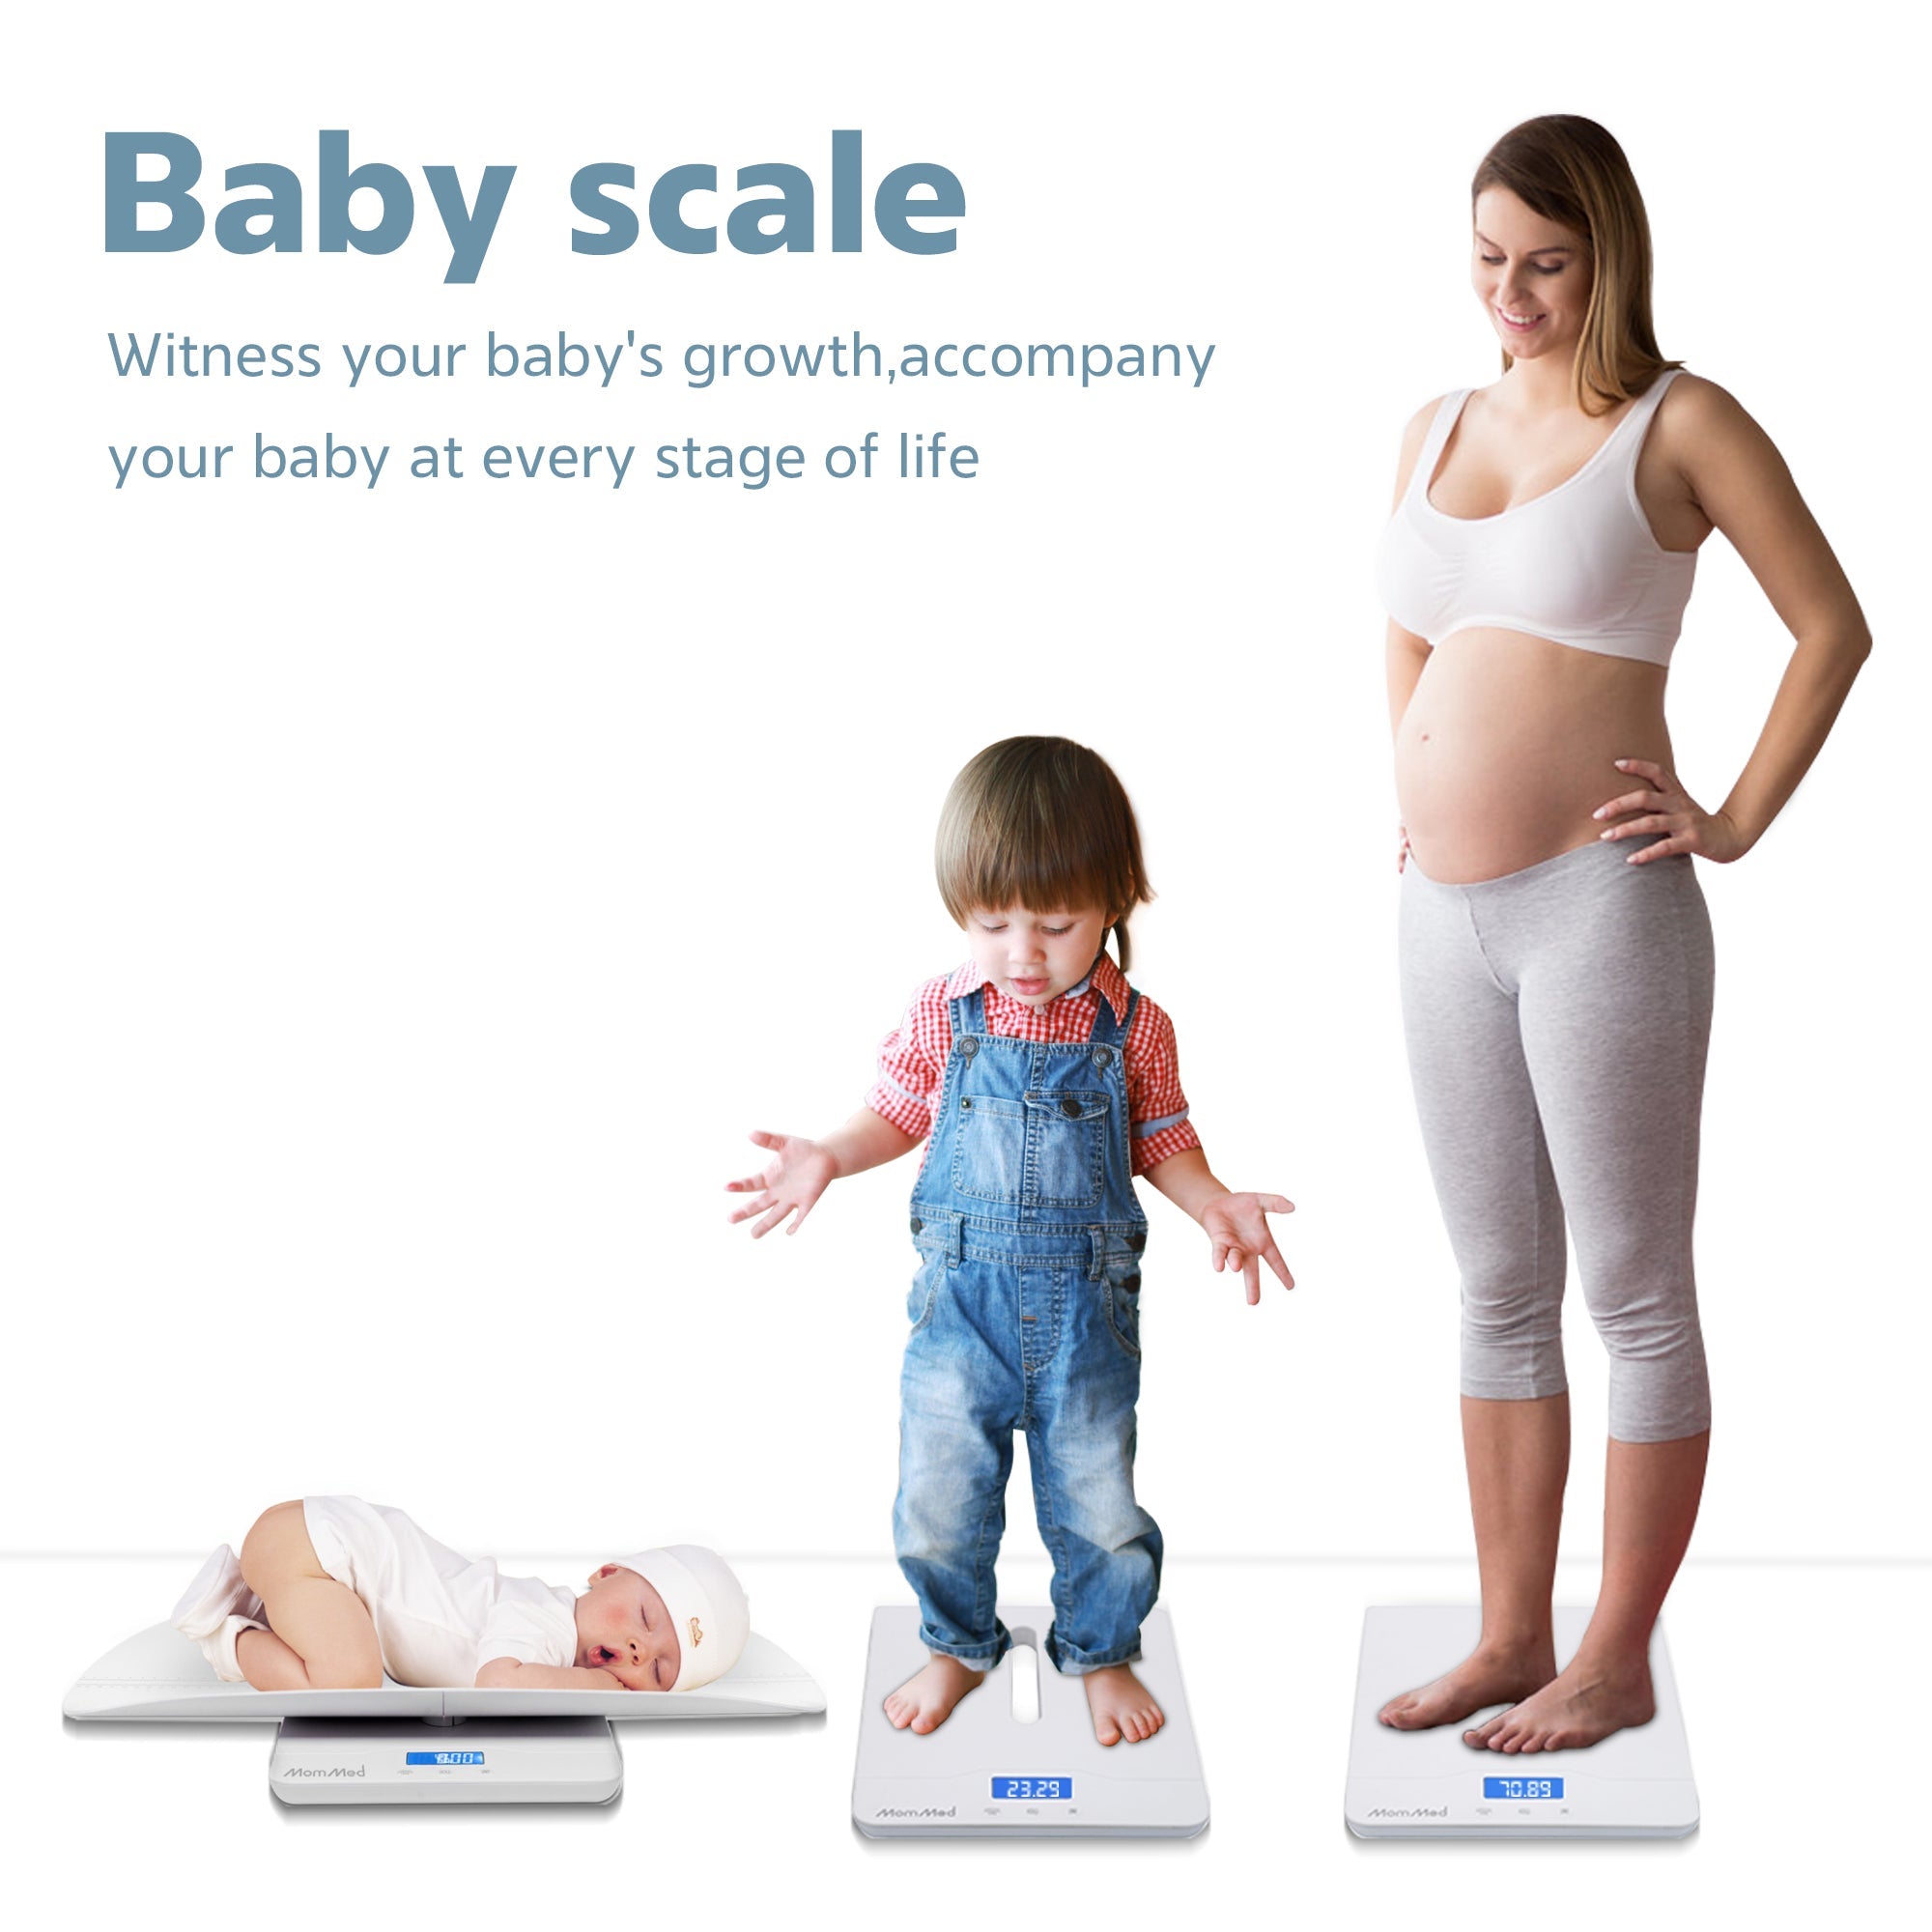 MomMed Baby Scale - 24 Inch